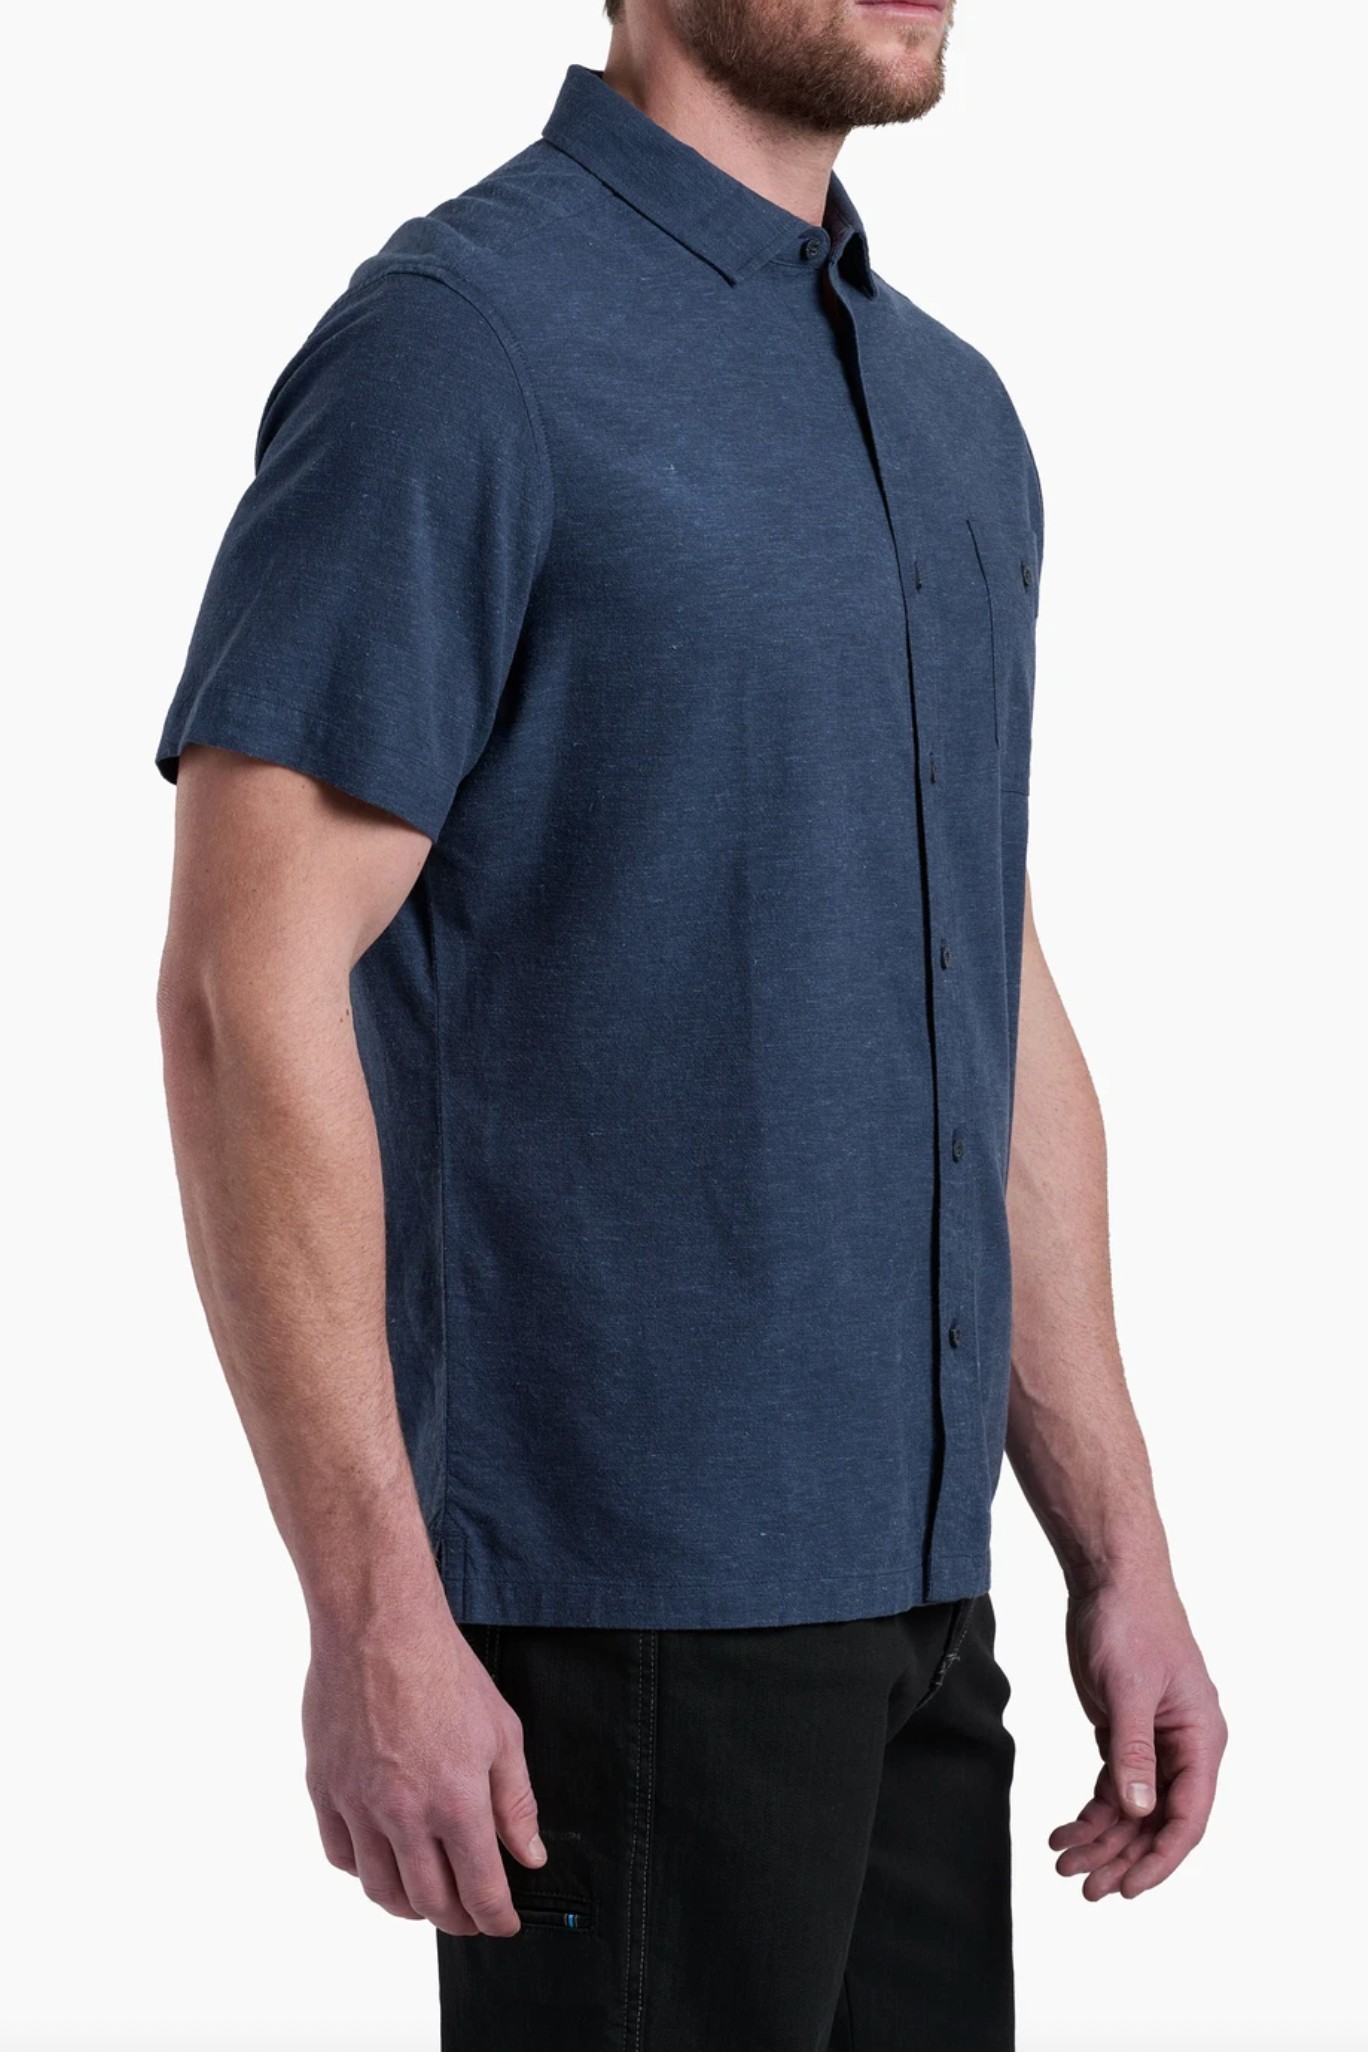 Featuring the natural comfort of our soft and sustainable hemp blend, the highly breathable GETAWAY™ takes your summer style to the next level. With a clean and casual look and sun (UPF 30) protective performance, the GETAWAY™ provides the ideal stretch for superior flexibility and fit. Durable, everyday wear for versatile summer fun.